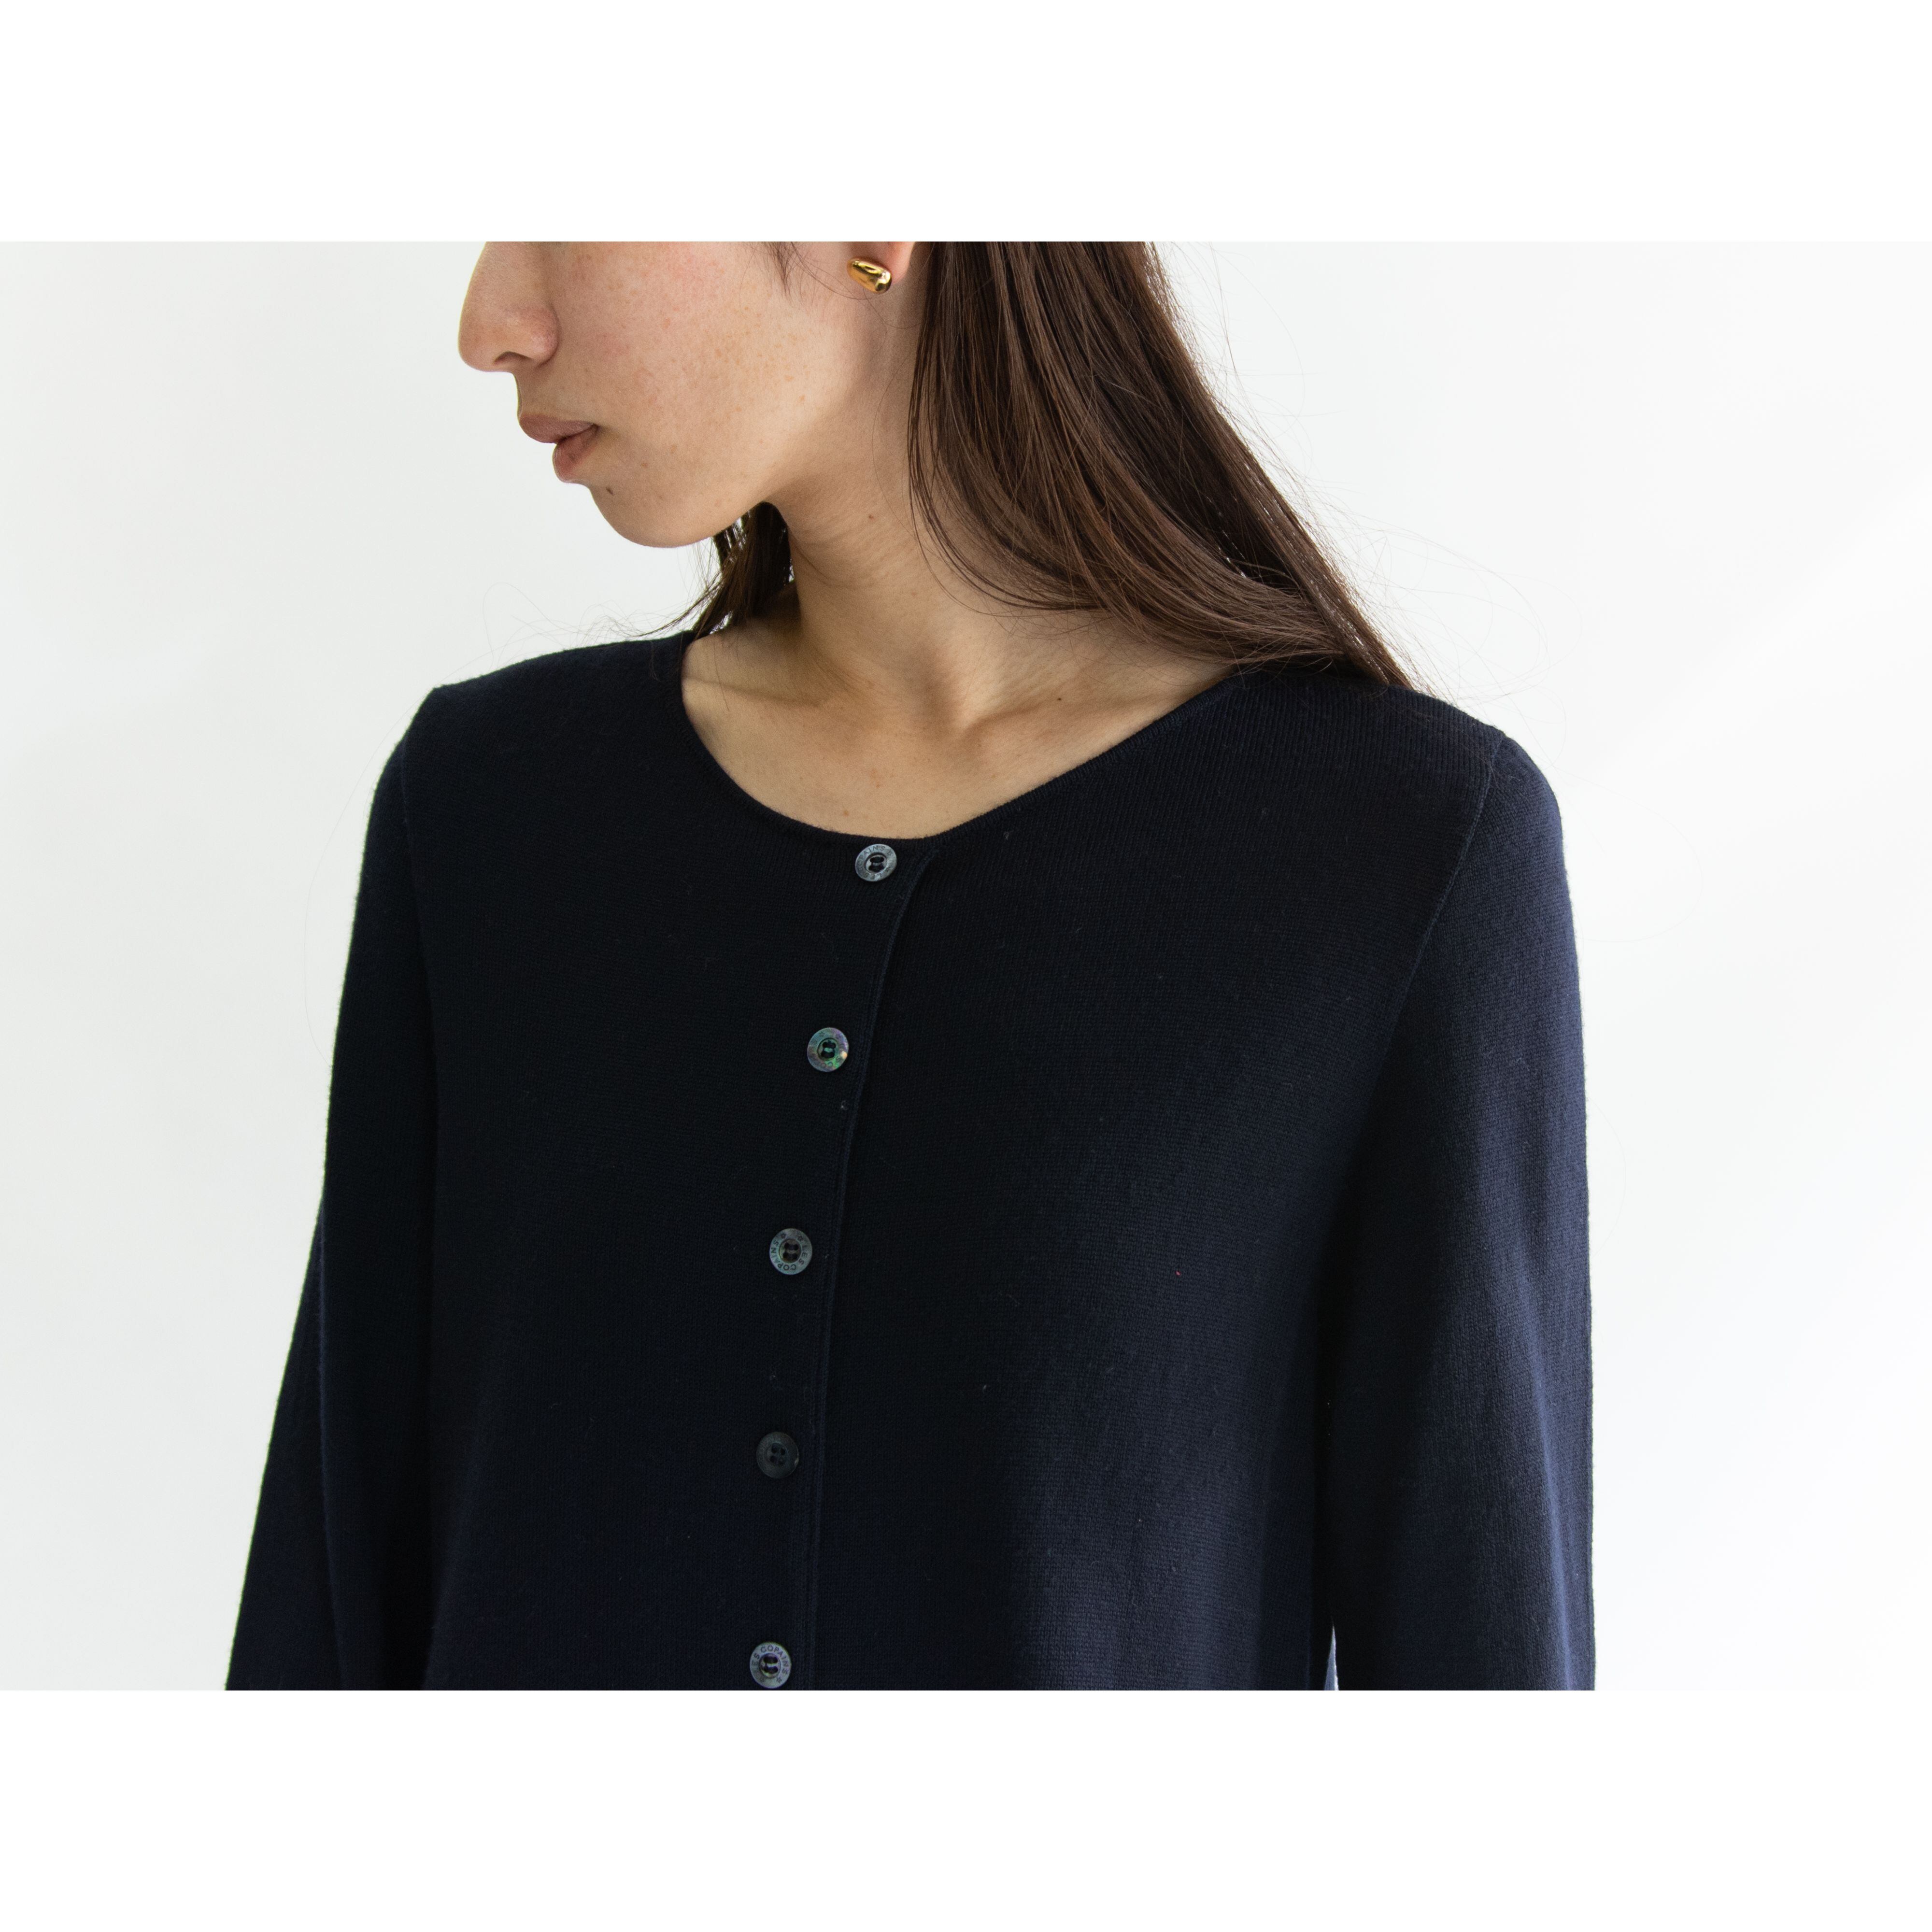 【Les Copains】Made in Italy wool knit pullover（レコパン イタリア製 ウールニットプルオーバー ）10d